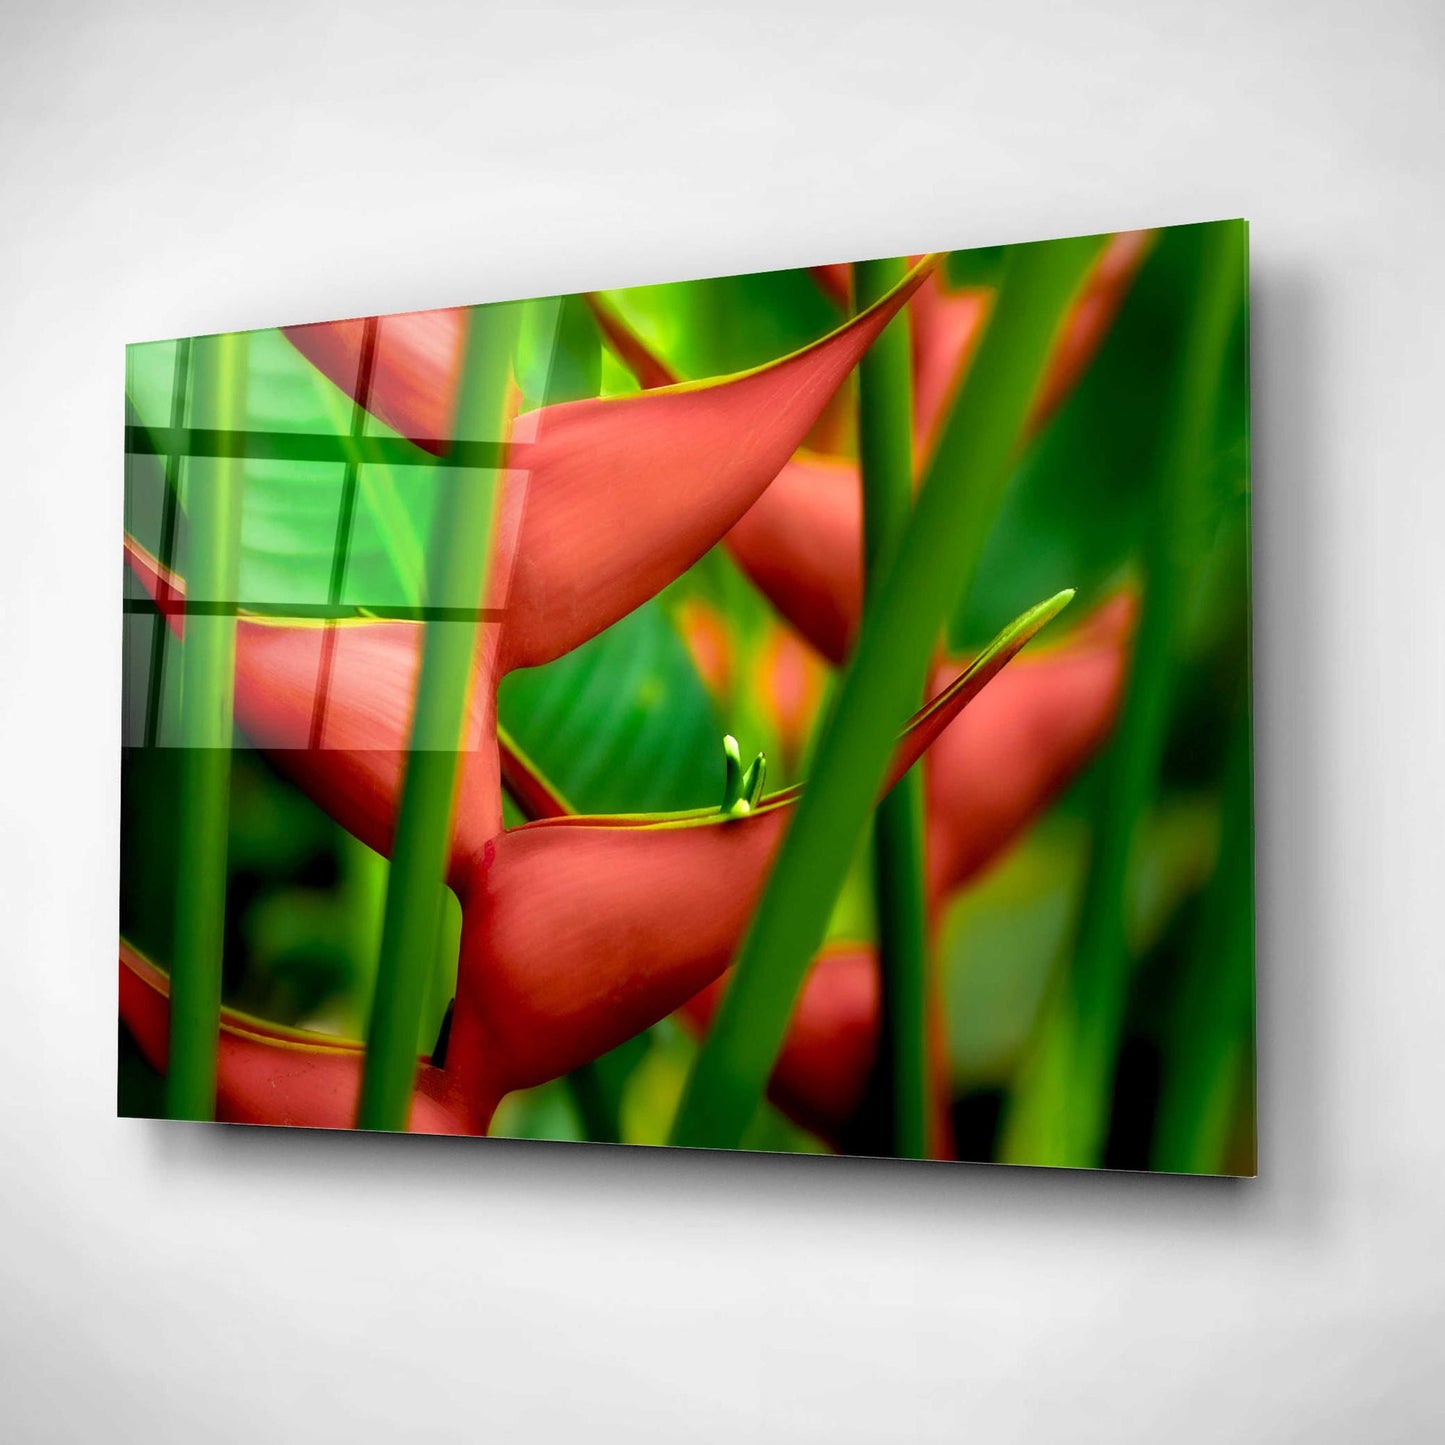 Epic Art 'Floral Details' by Dennis Frates, Acrylic Glass Wall Art,24x16